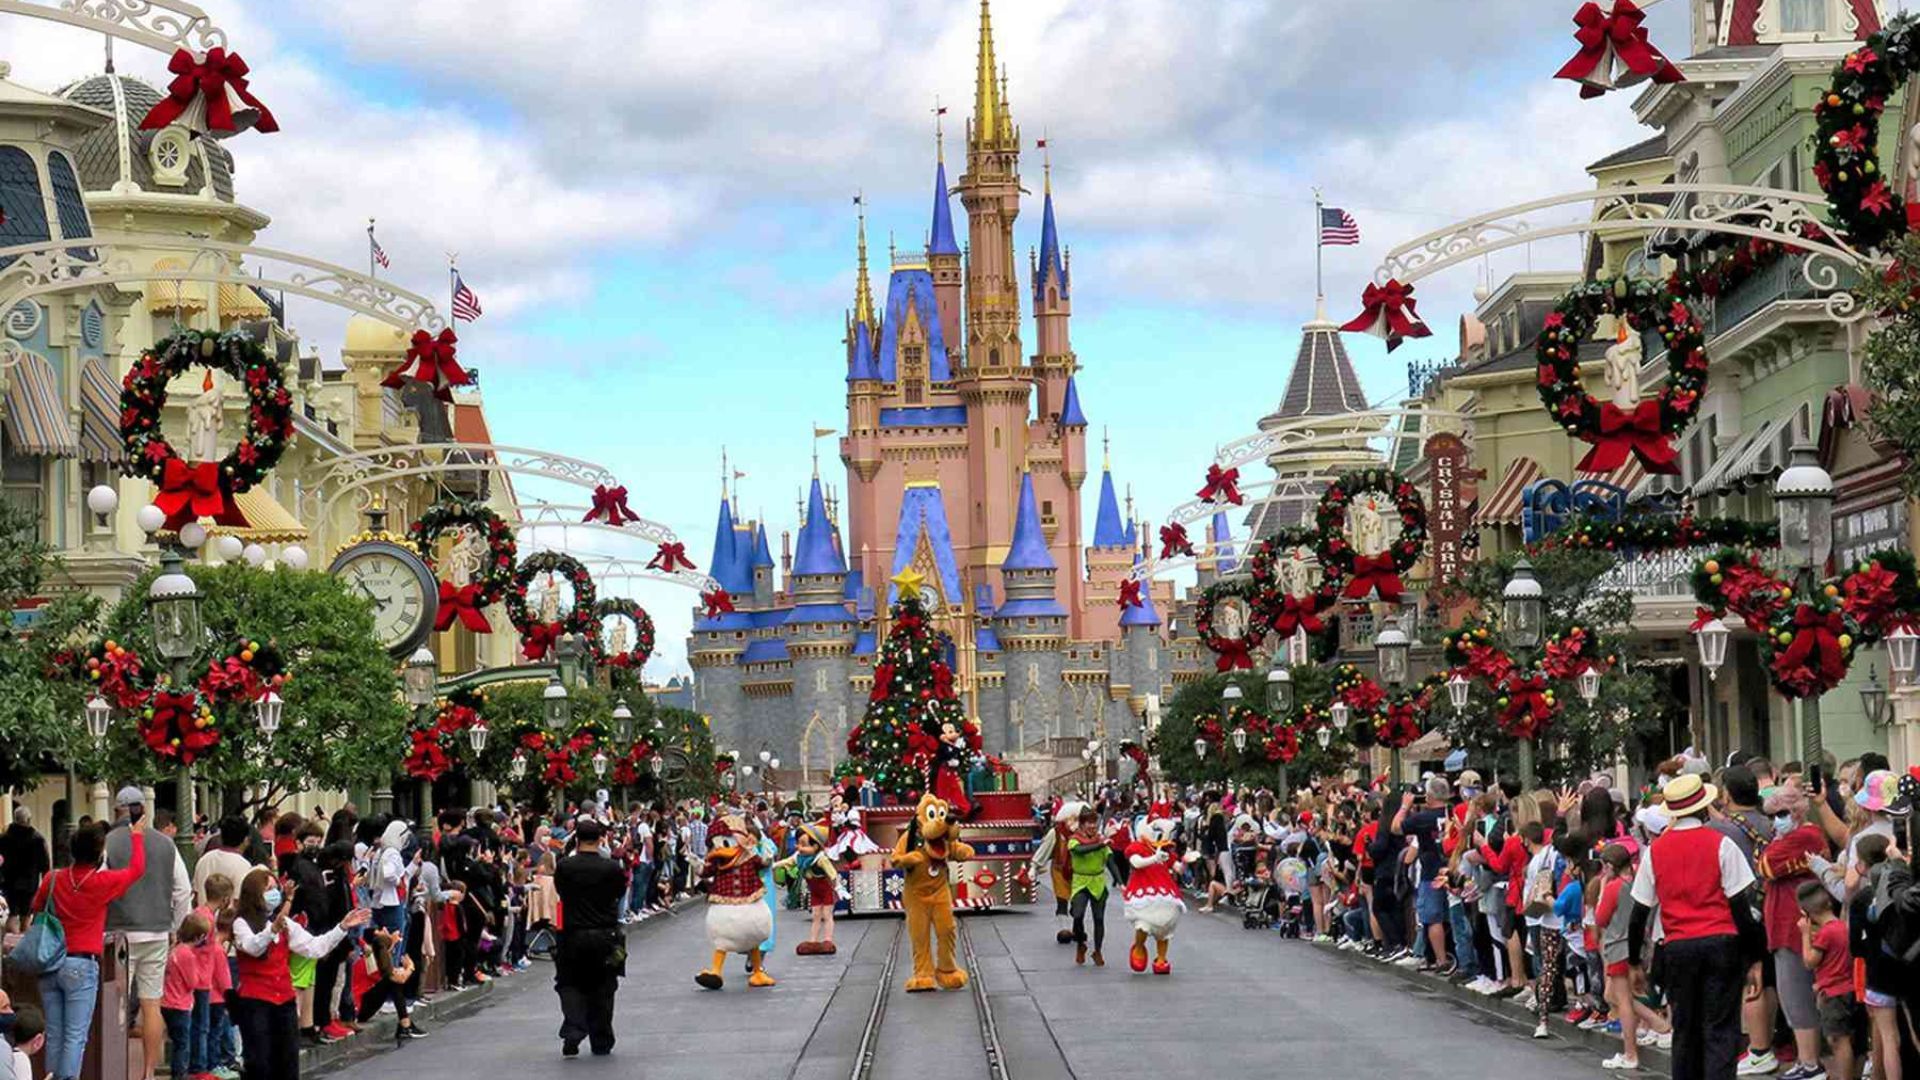 Walt Disney World Increases Its Entry Prices Ahead Of The Holidays